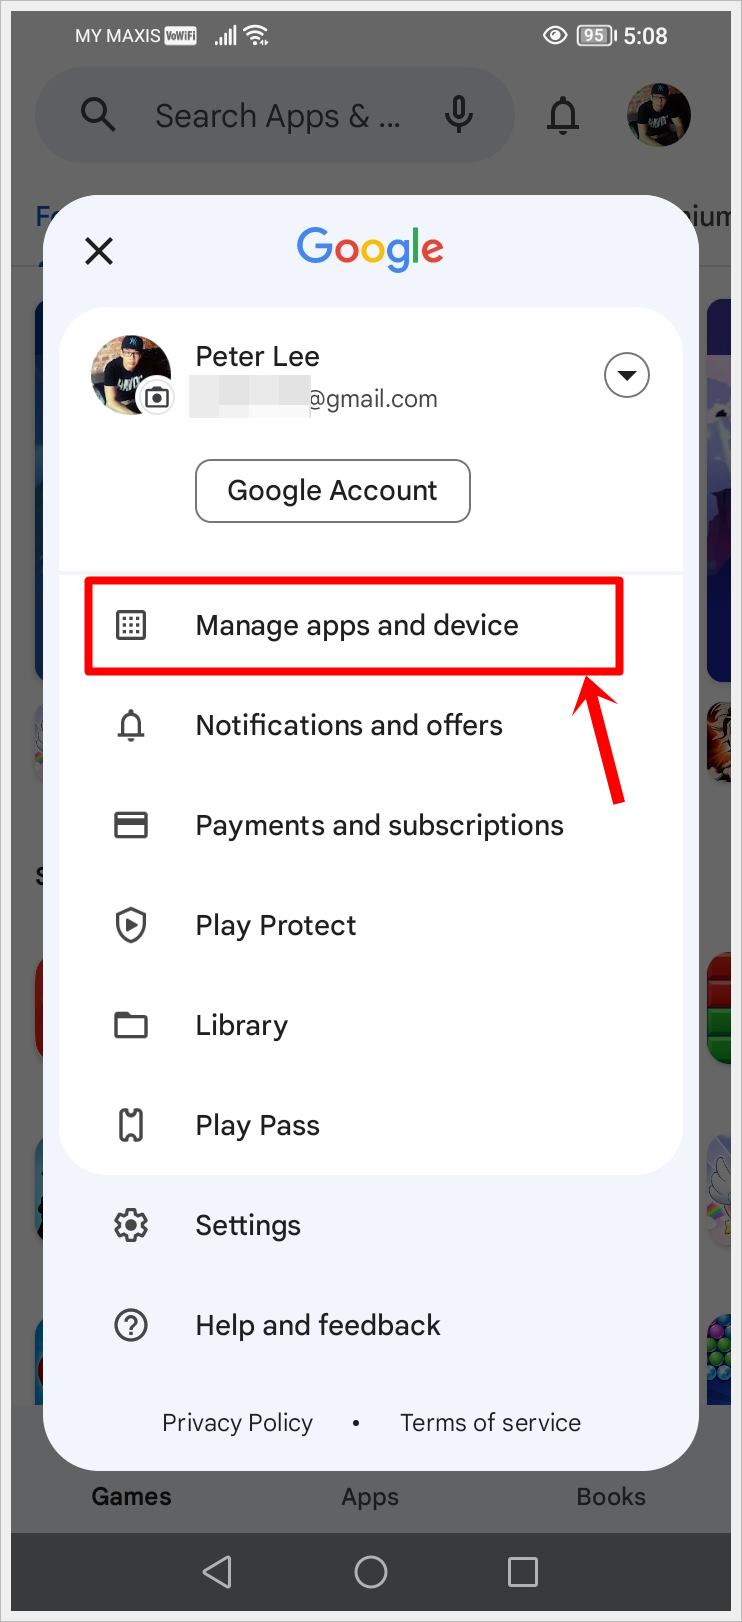 This image shows the Google Account Settings in Play Store, with the "Manage apps and device" option highlighted.